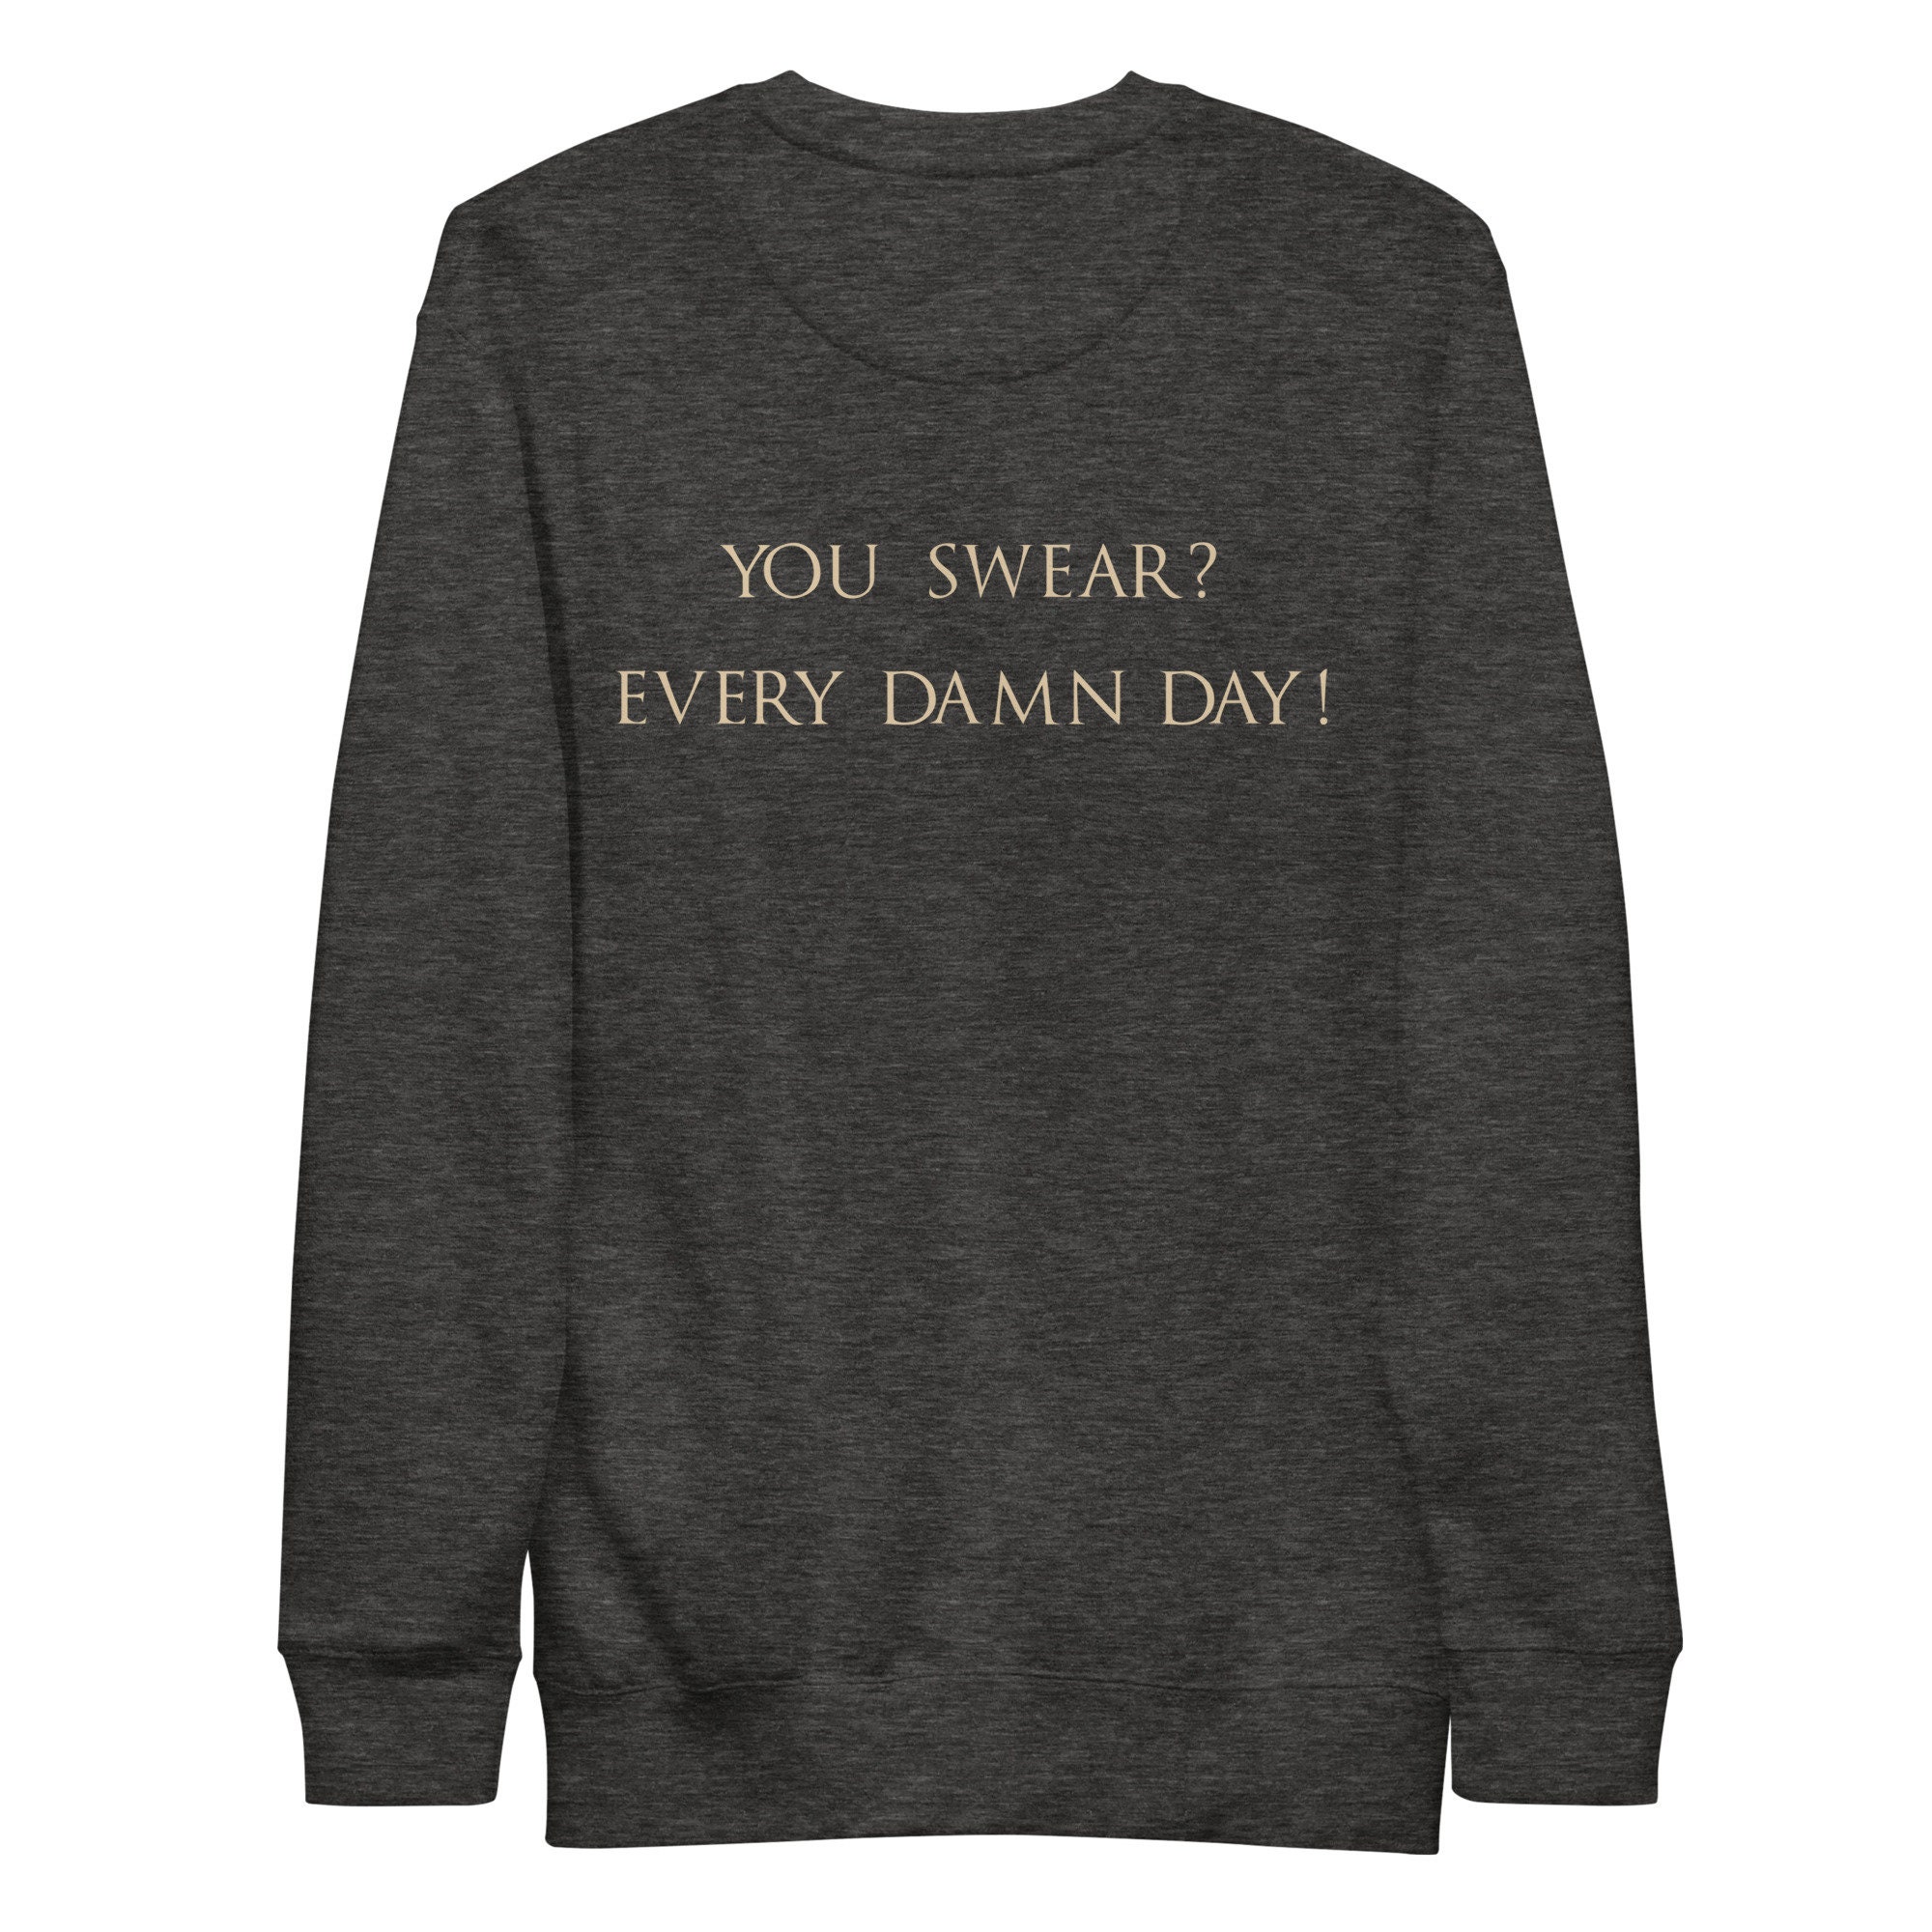 Discover You Swear? Every Damn Day! On Back -The Mummy Vintage Movie Poster Sweatshirt